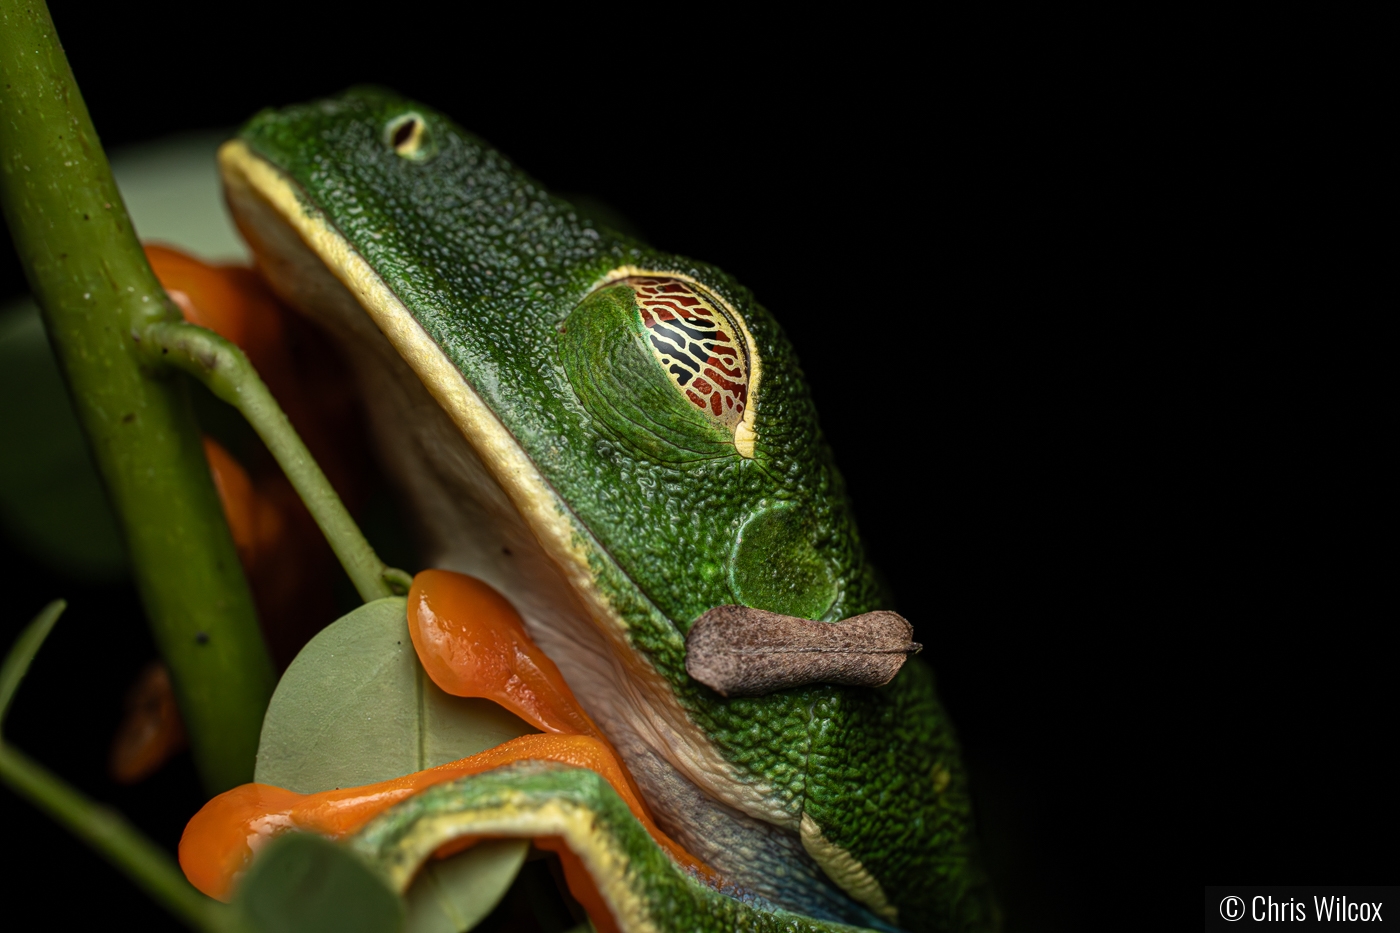 Red eyed tree frog at night by Chris Wilcox